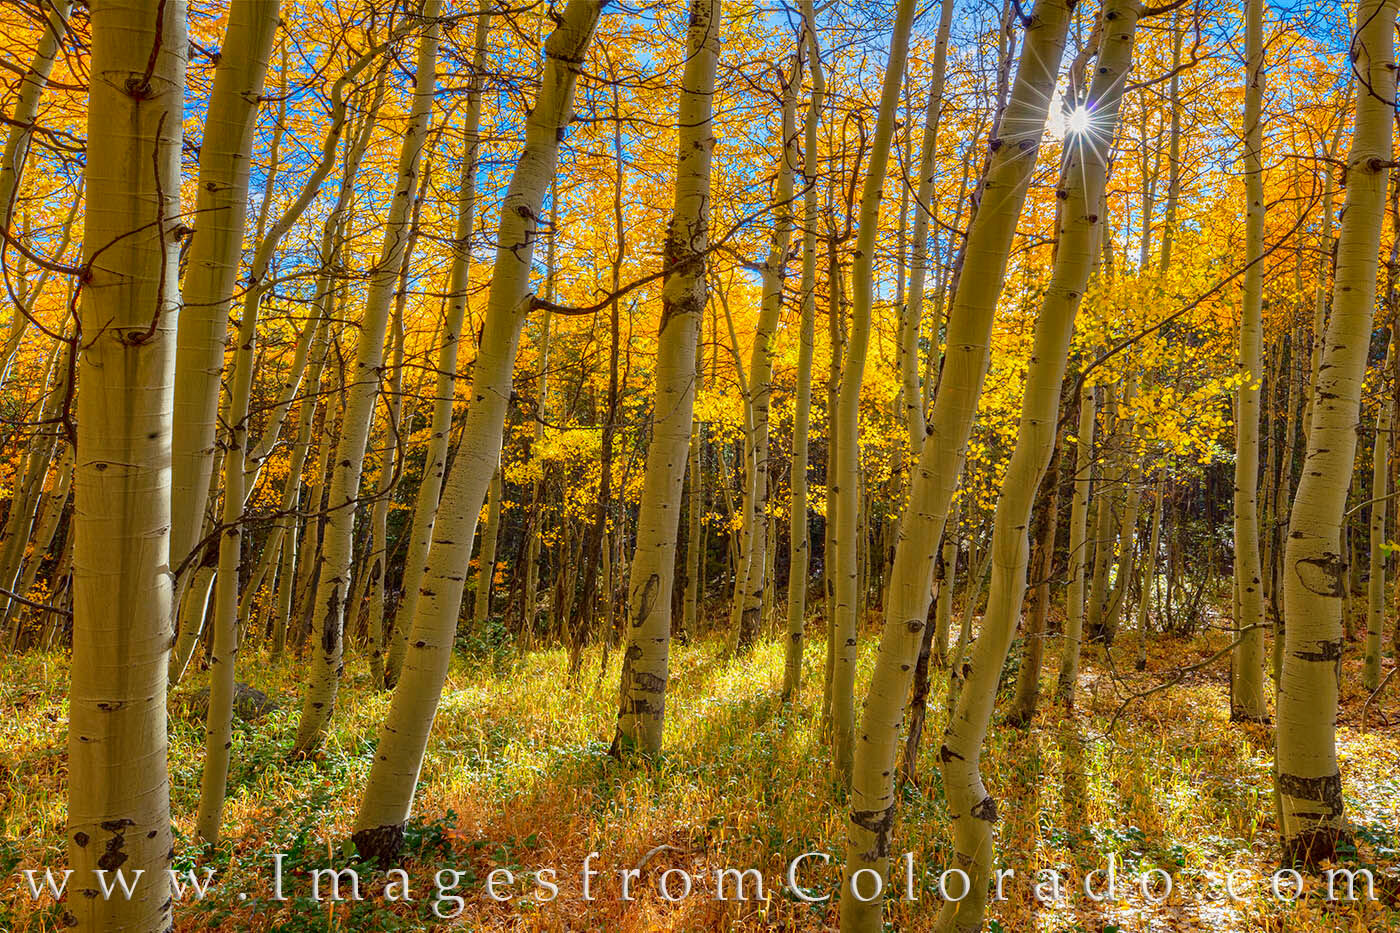 Warming sunlight spreads its rays through a grove of beautiful aspen trees on a cold fall morning near Winter Park, Colorado